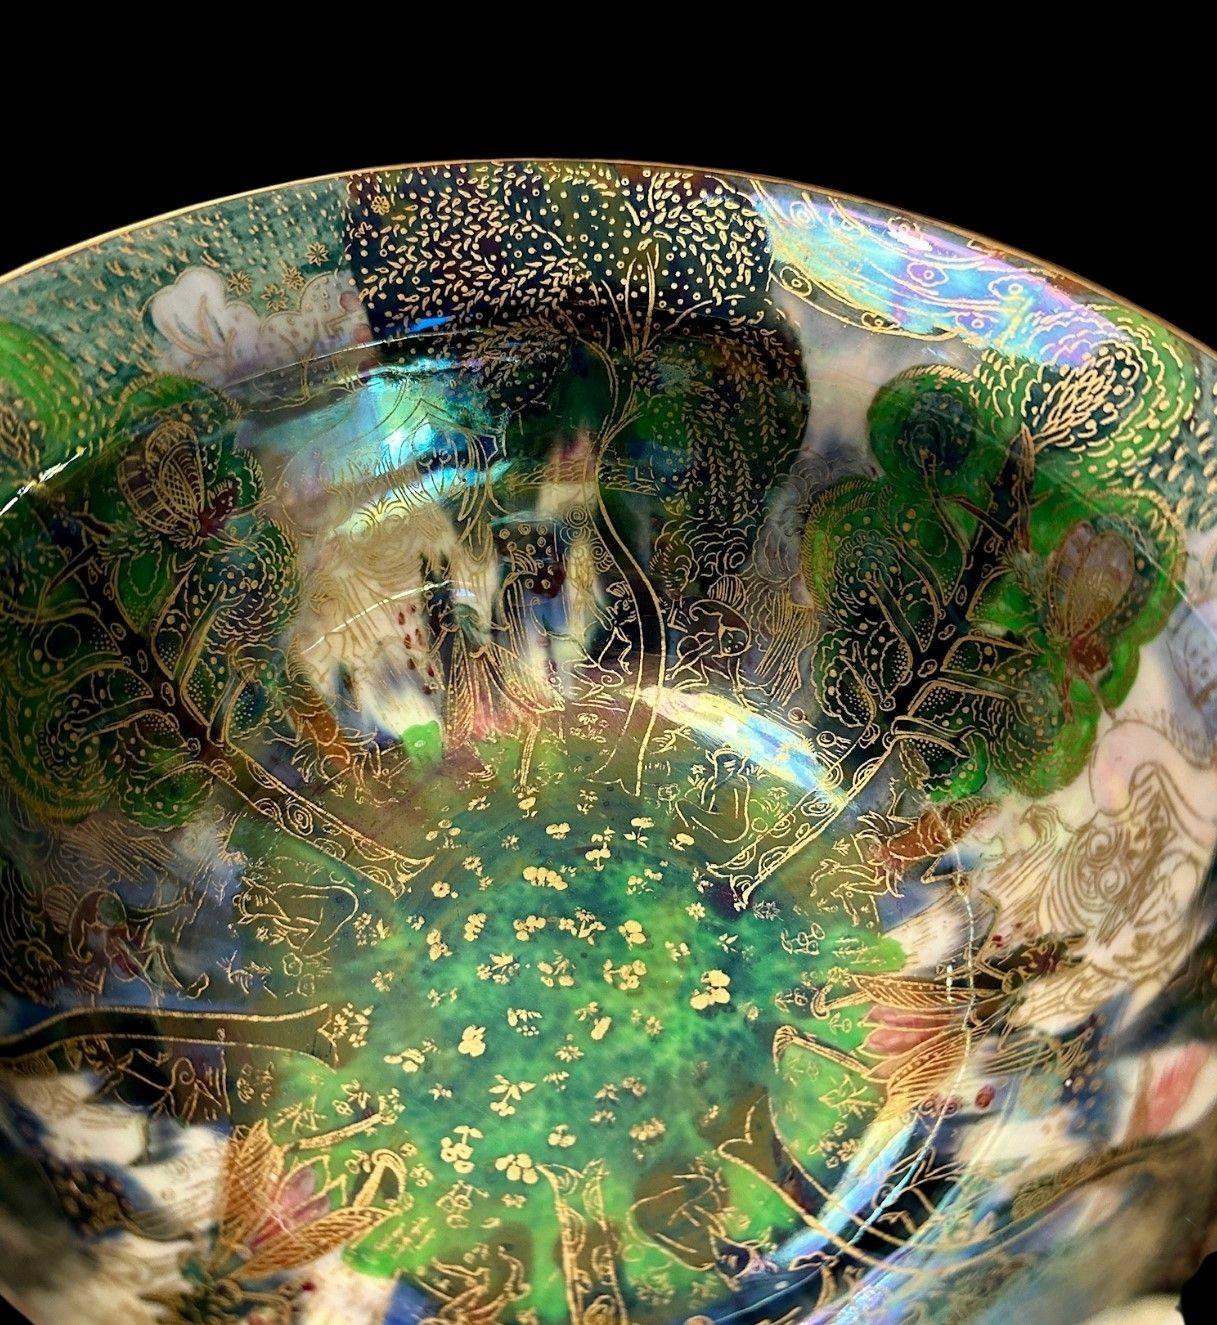 5473
Wedgwood Fairyland Lustre K’ang Hsi Bowl in the “Woodland Bridge” and “Garden of Paradise” Designs
9cm high, 18.5cm wide
Circa 1915